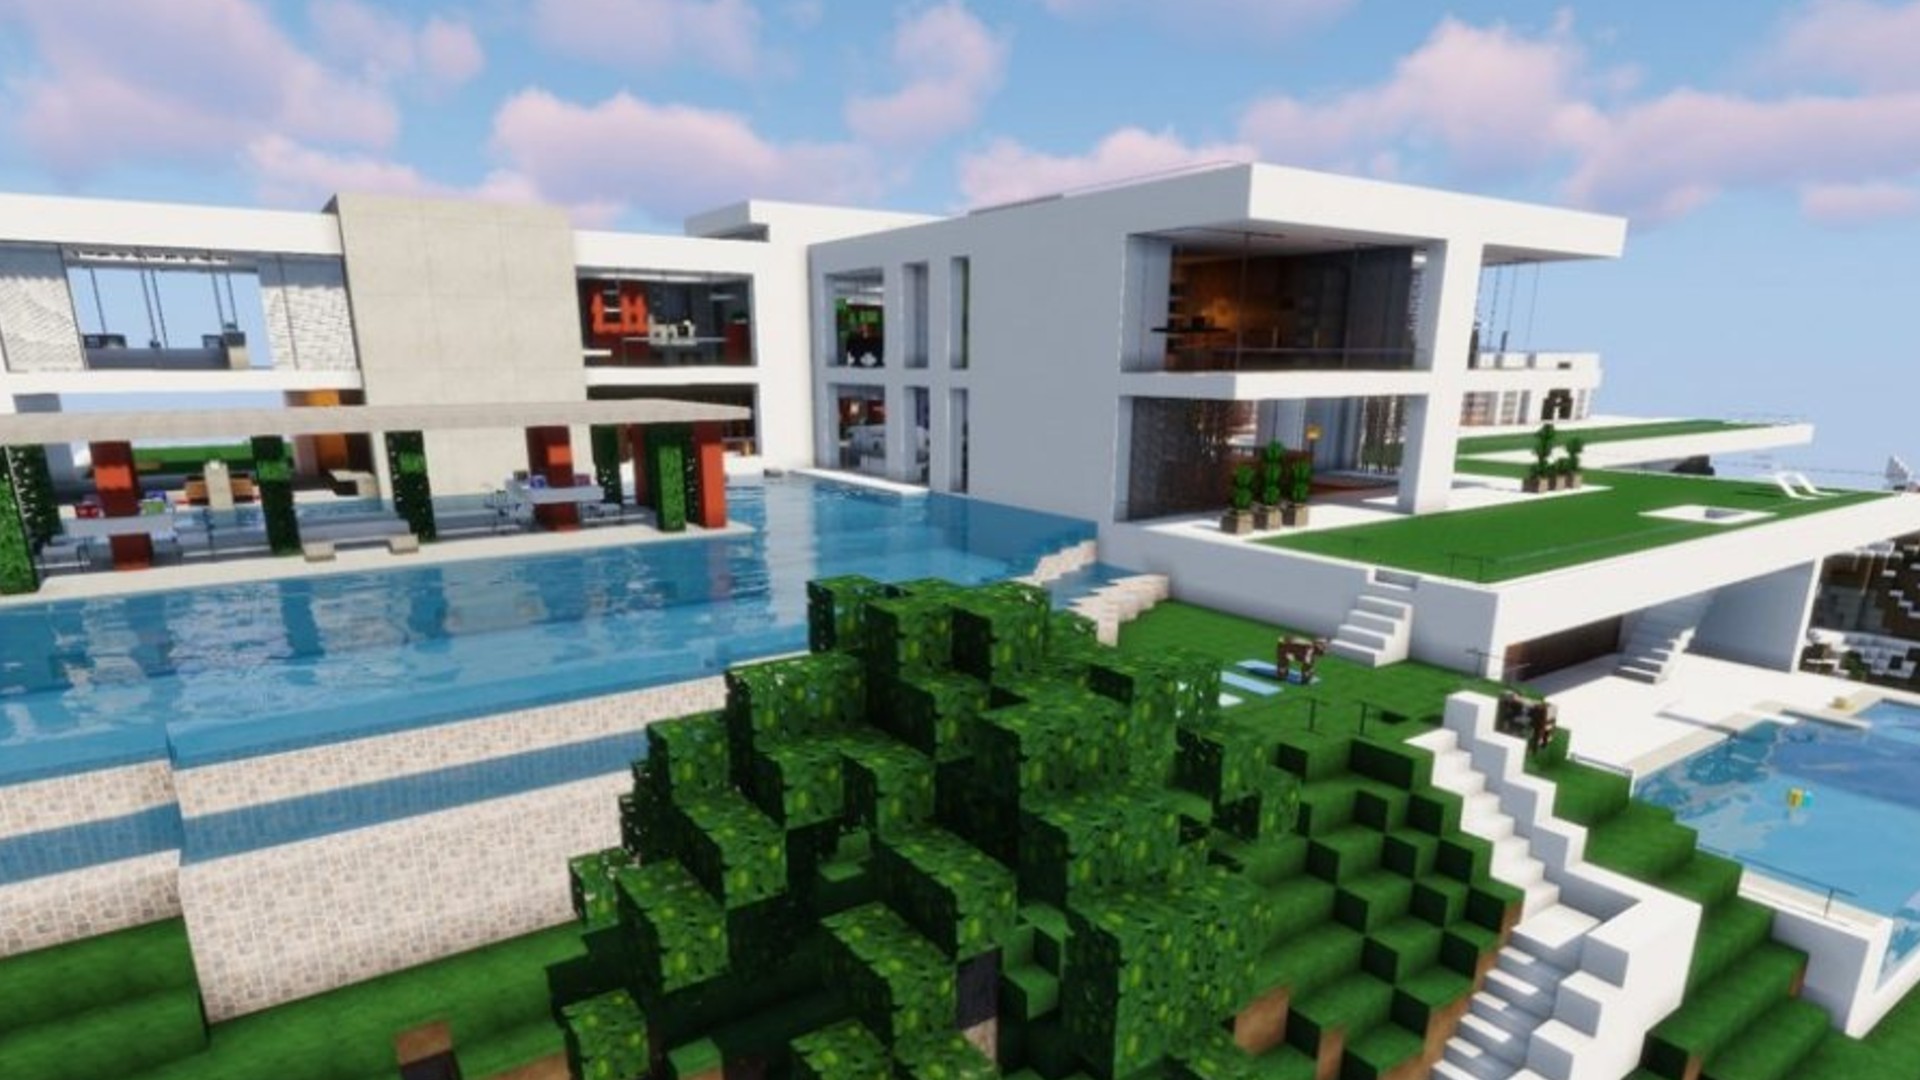 Cool Minecraft home concepts on your subsequent construct